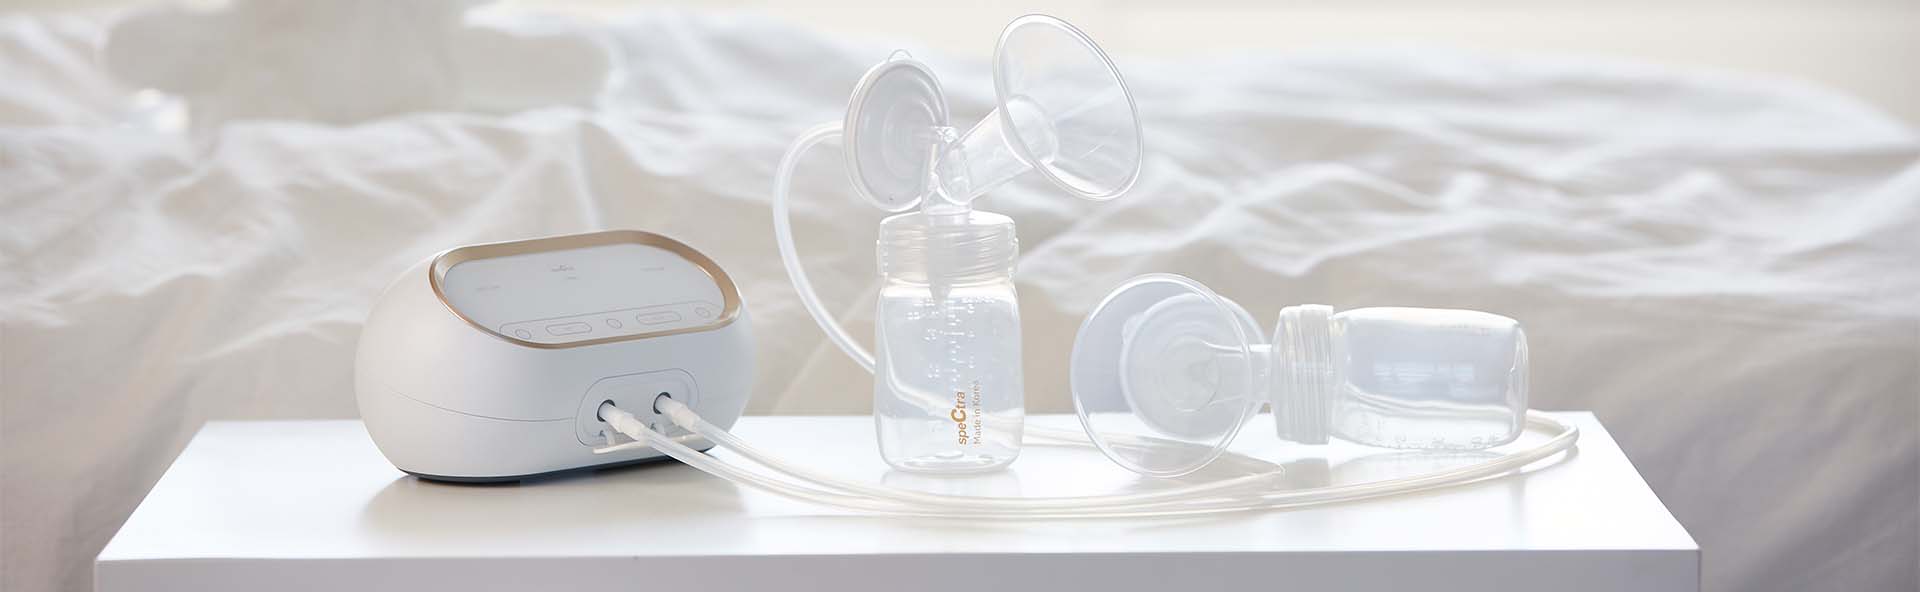 Official Hong Kong and Macau distributor for Spectra electric breast pumps  and products, selling offical Spectra products. Providing breast pumps, breast  milk storage, feeding, breast care and accessories for breastfeeding. –  Spectra